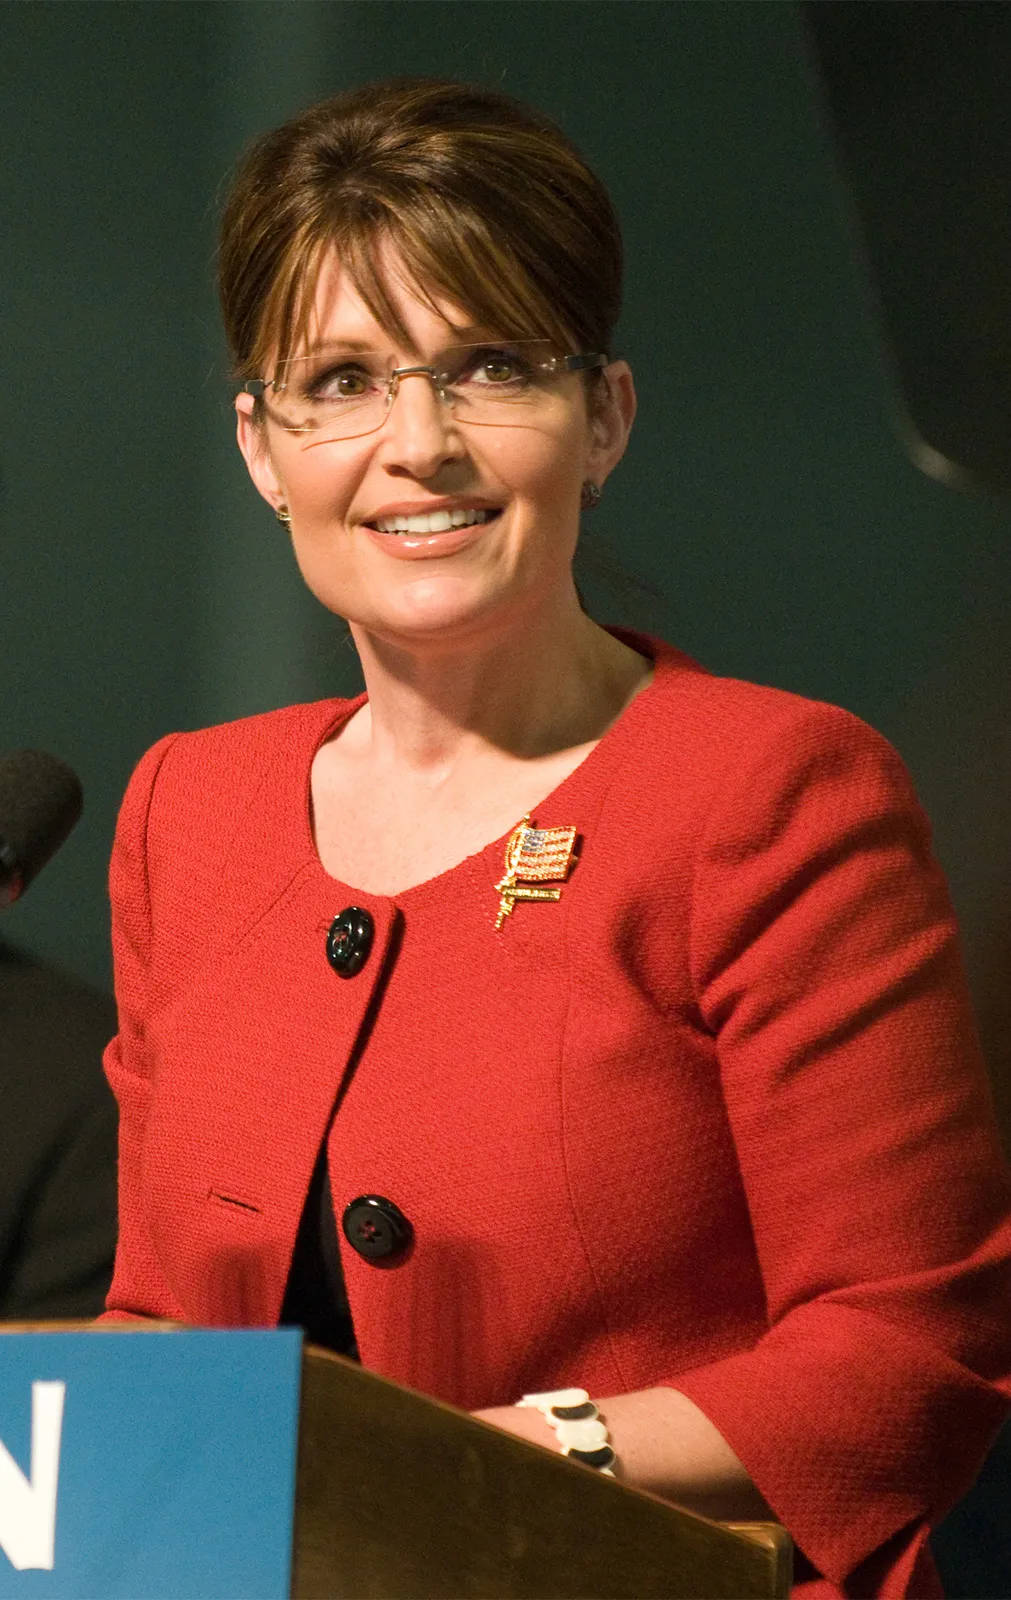 Sarah Palin speaking at a conference in Lancaster Wallpaper